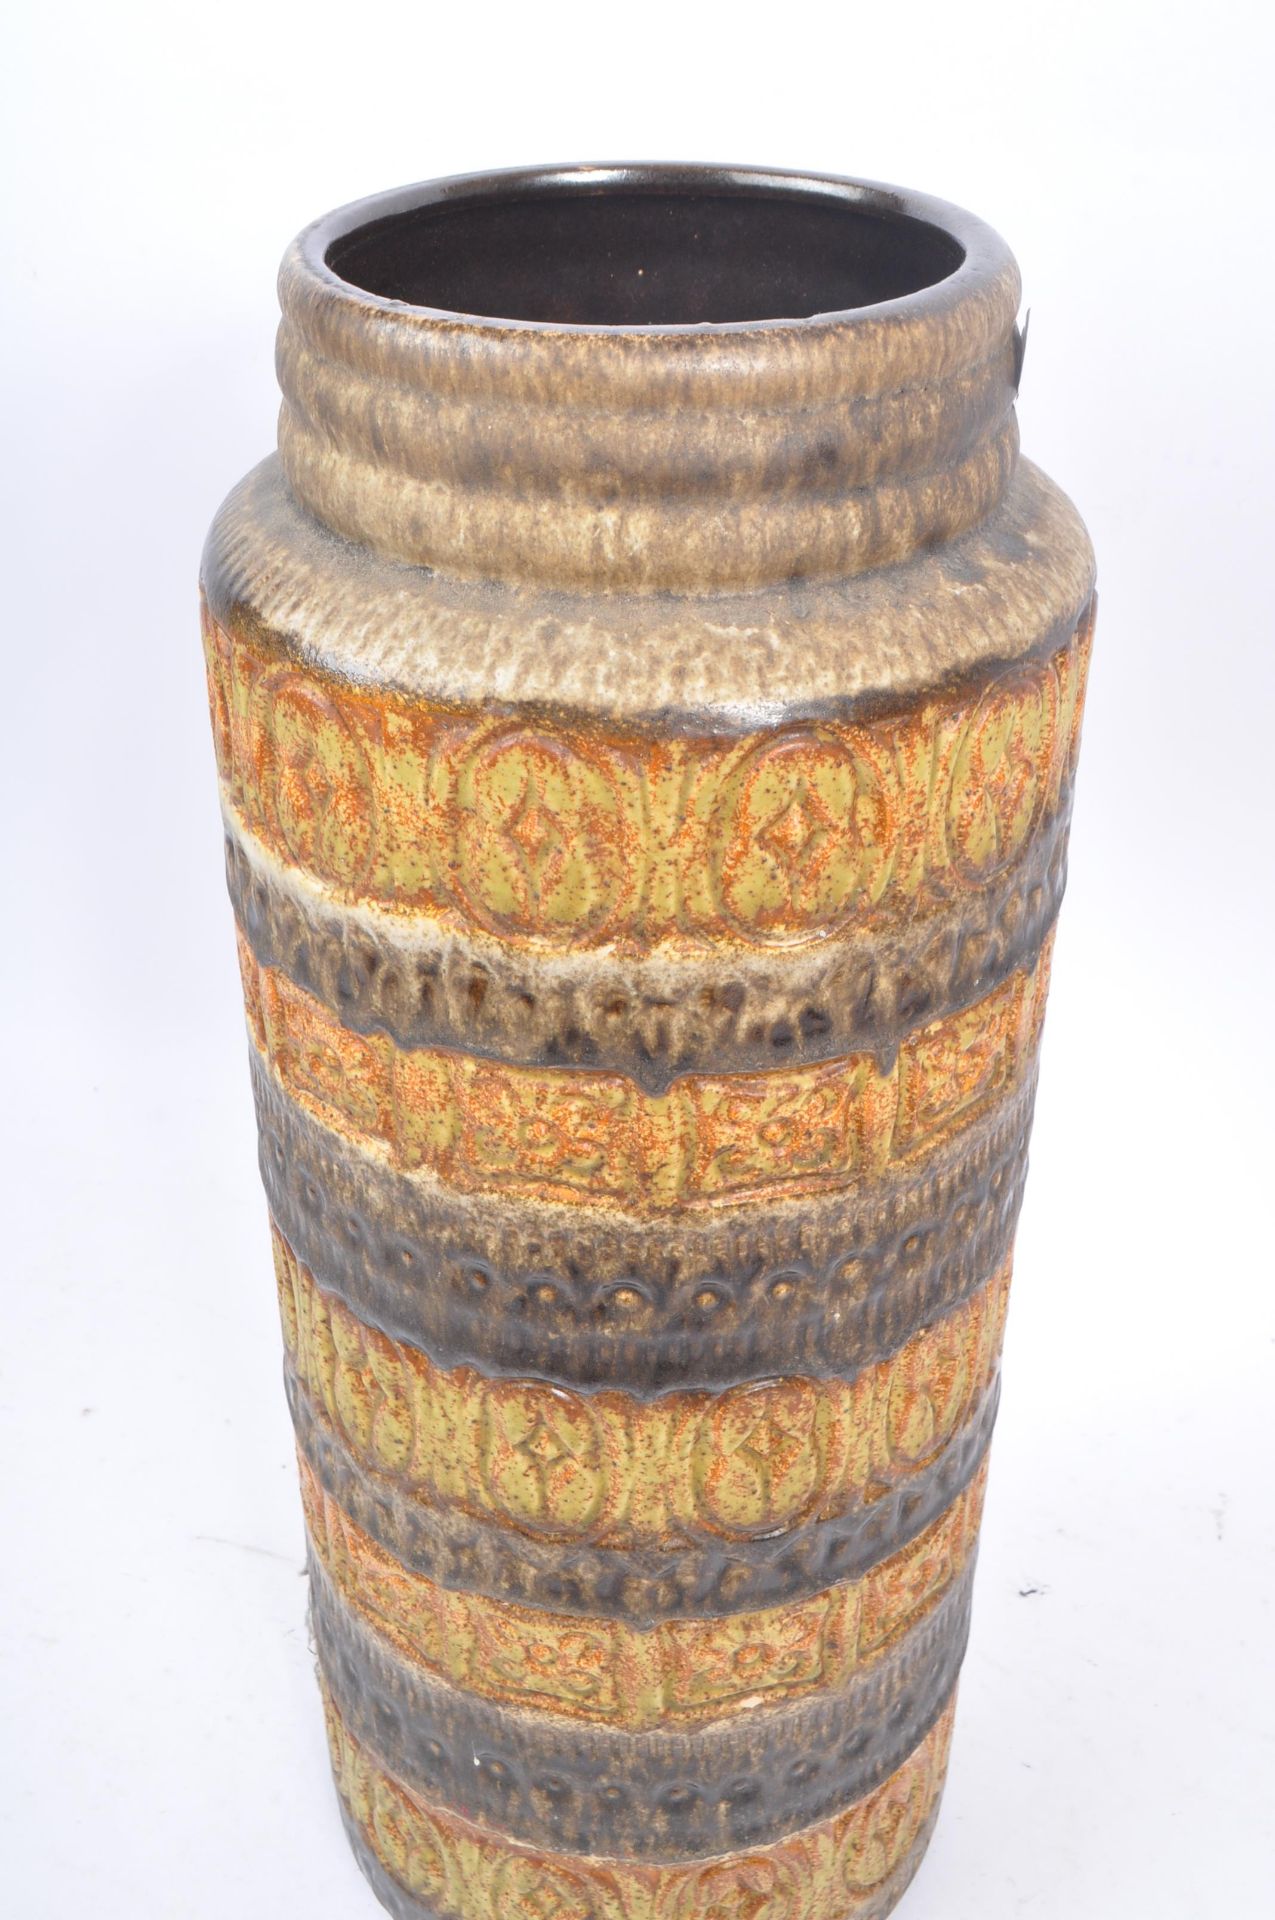 SCHEURICH - WEST GERMAN POTTERY - TWO MID CENTURY VASES - Image 7 of 8